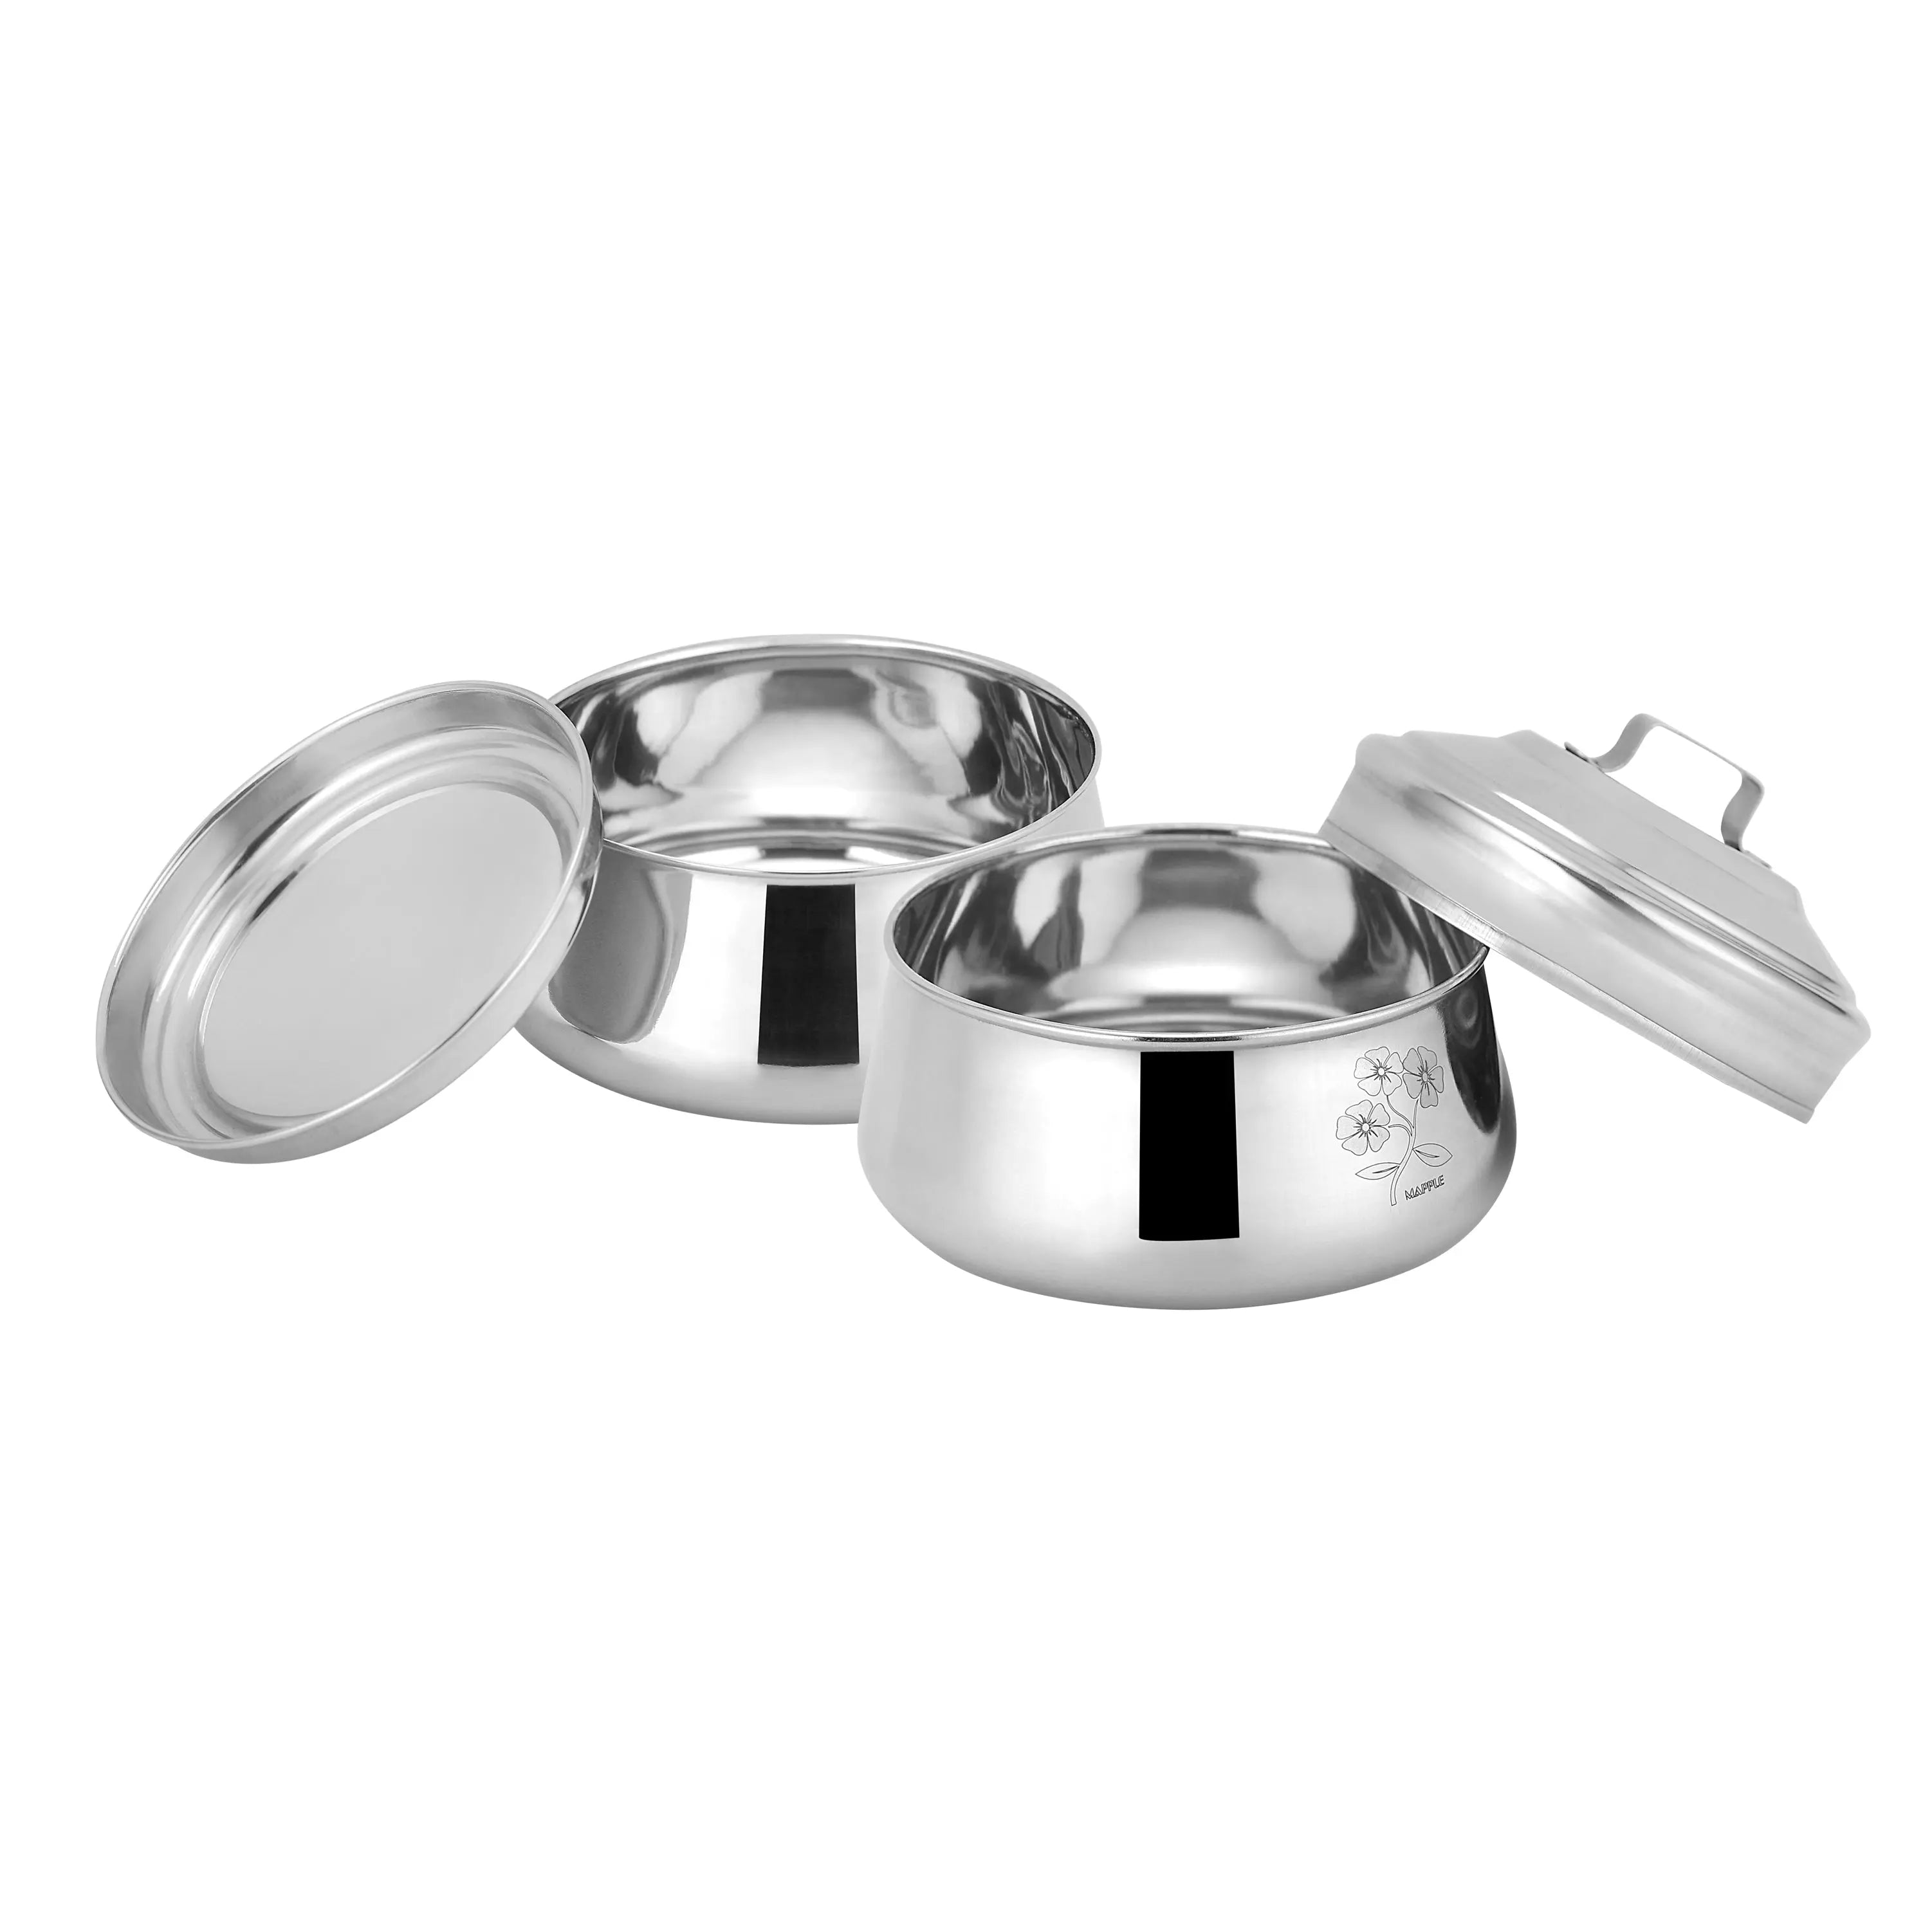 STAINLESS STEEL PYRAMID TIFFIN - CROCKERY WALA AND COMPANY 